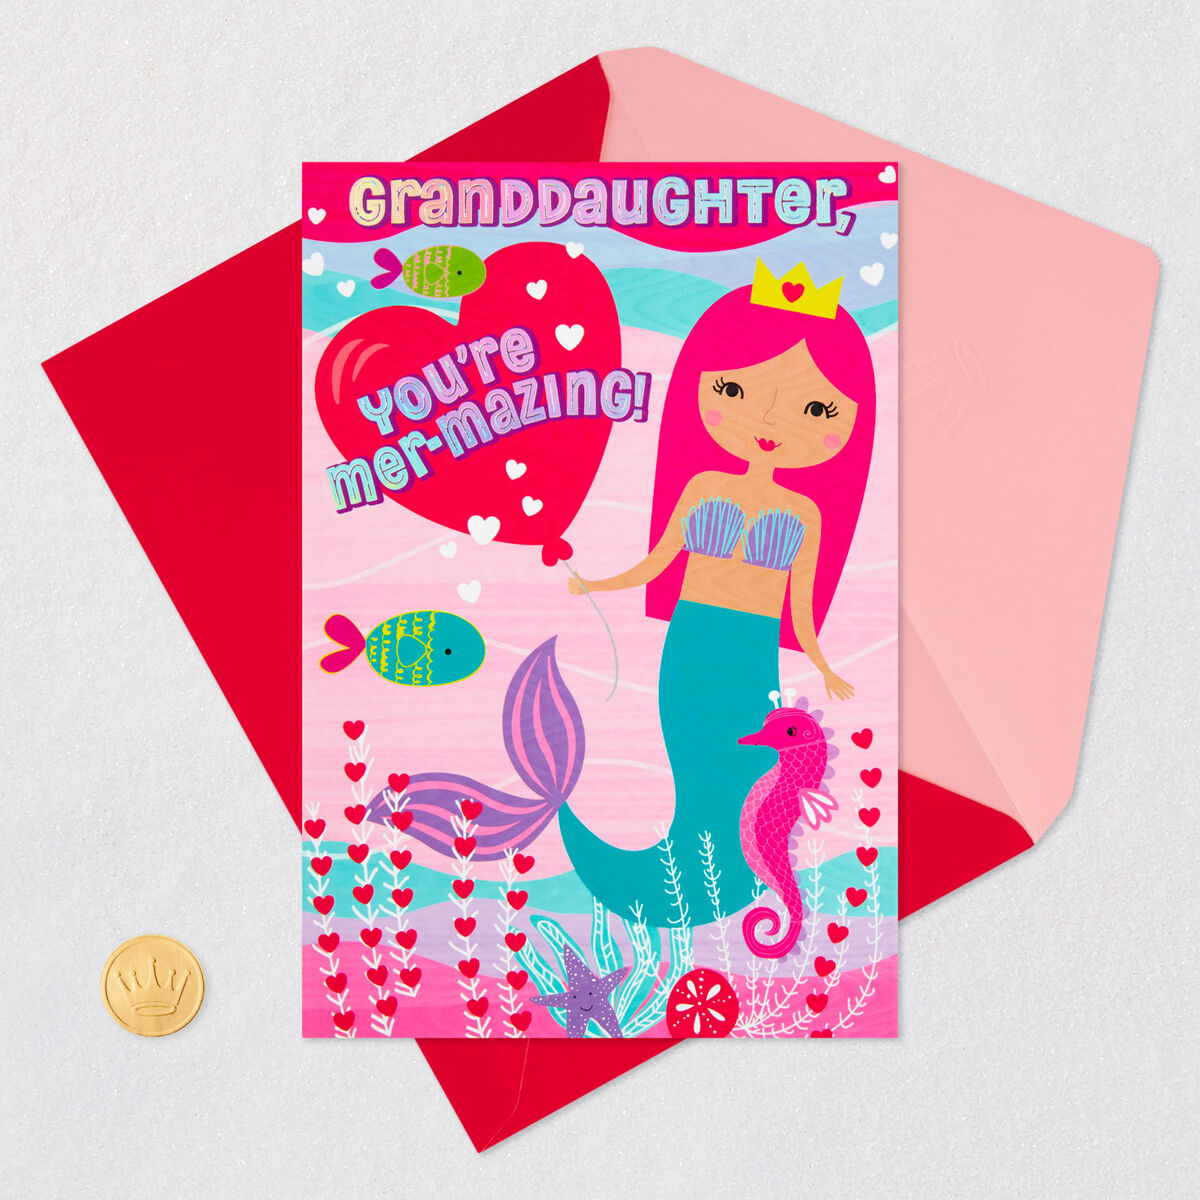 mermaid-valentine-s-day-card-for-granddaughter-with-stickers-greeting